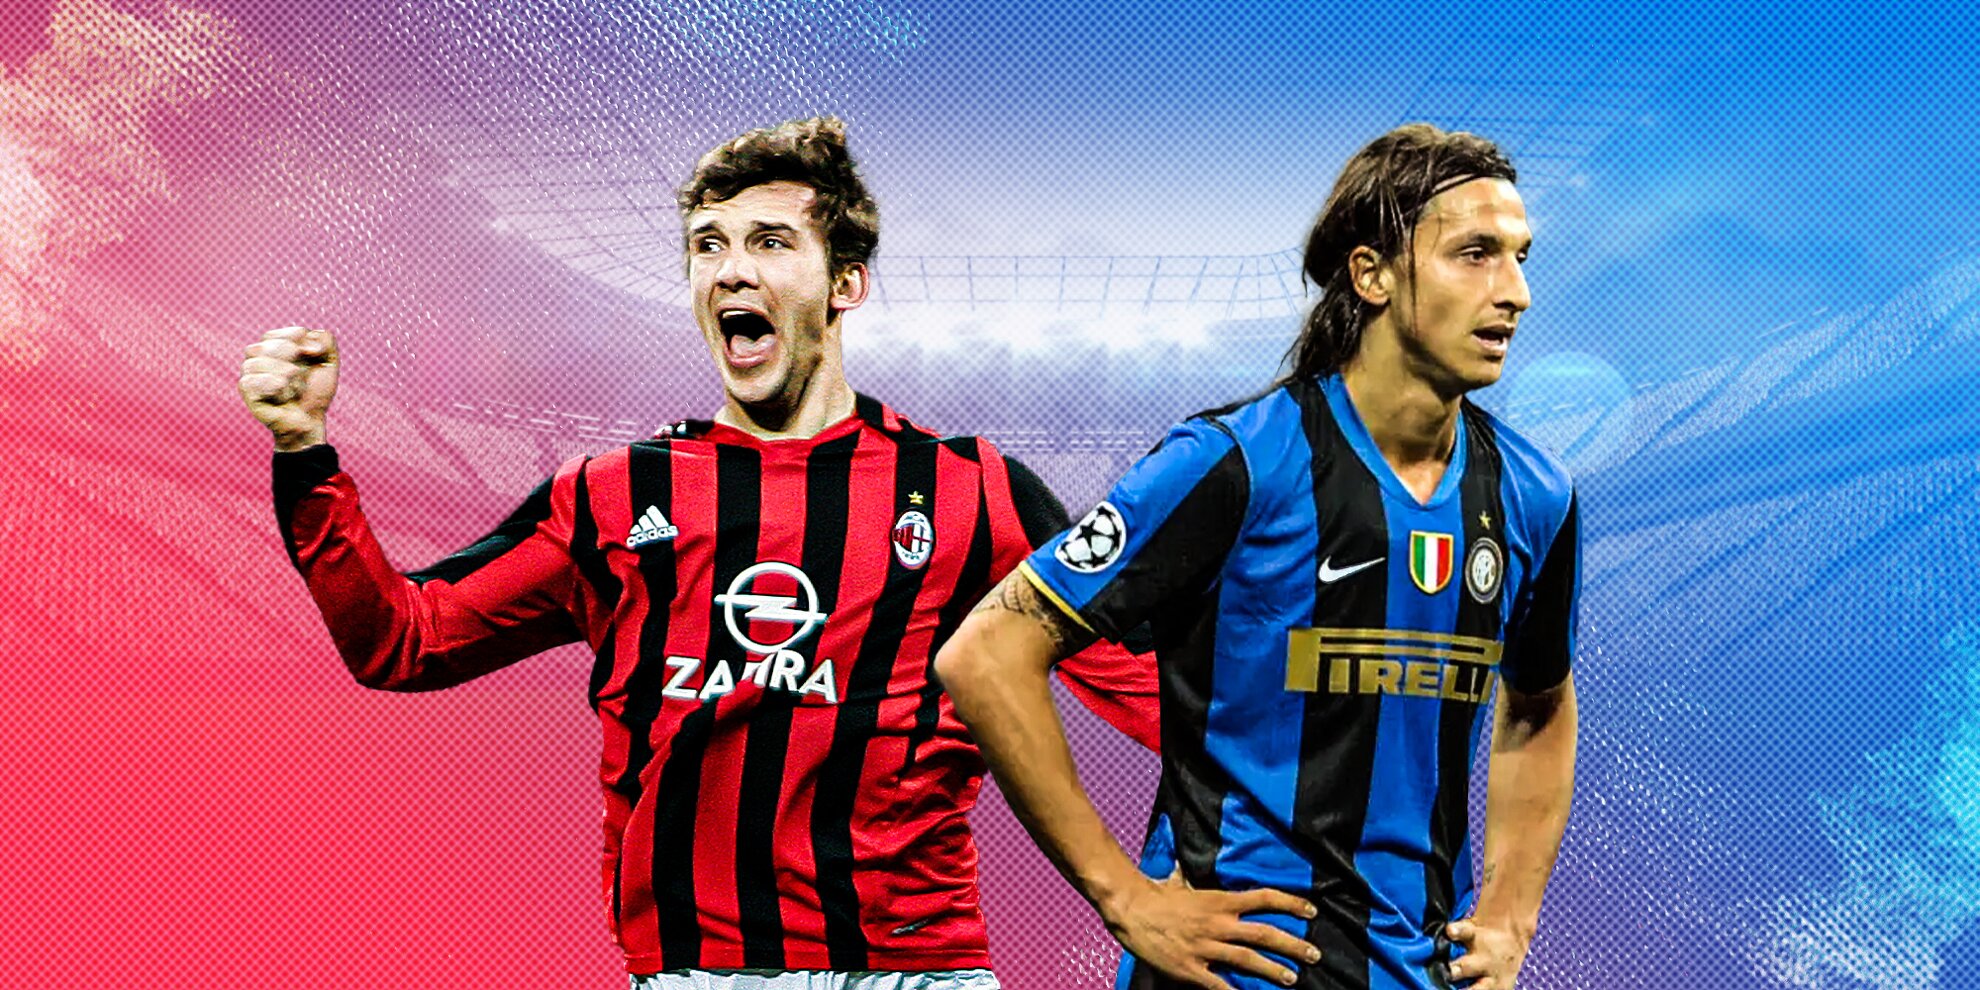 Top 10 players with the most goals in the Milan derby